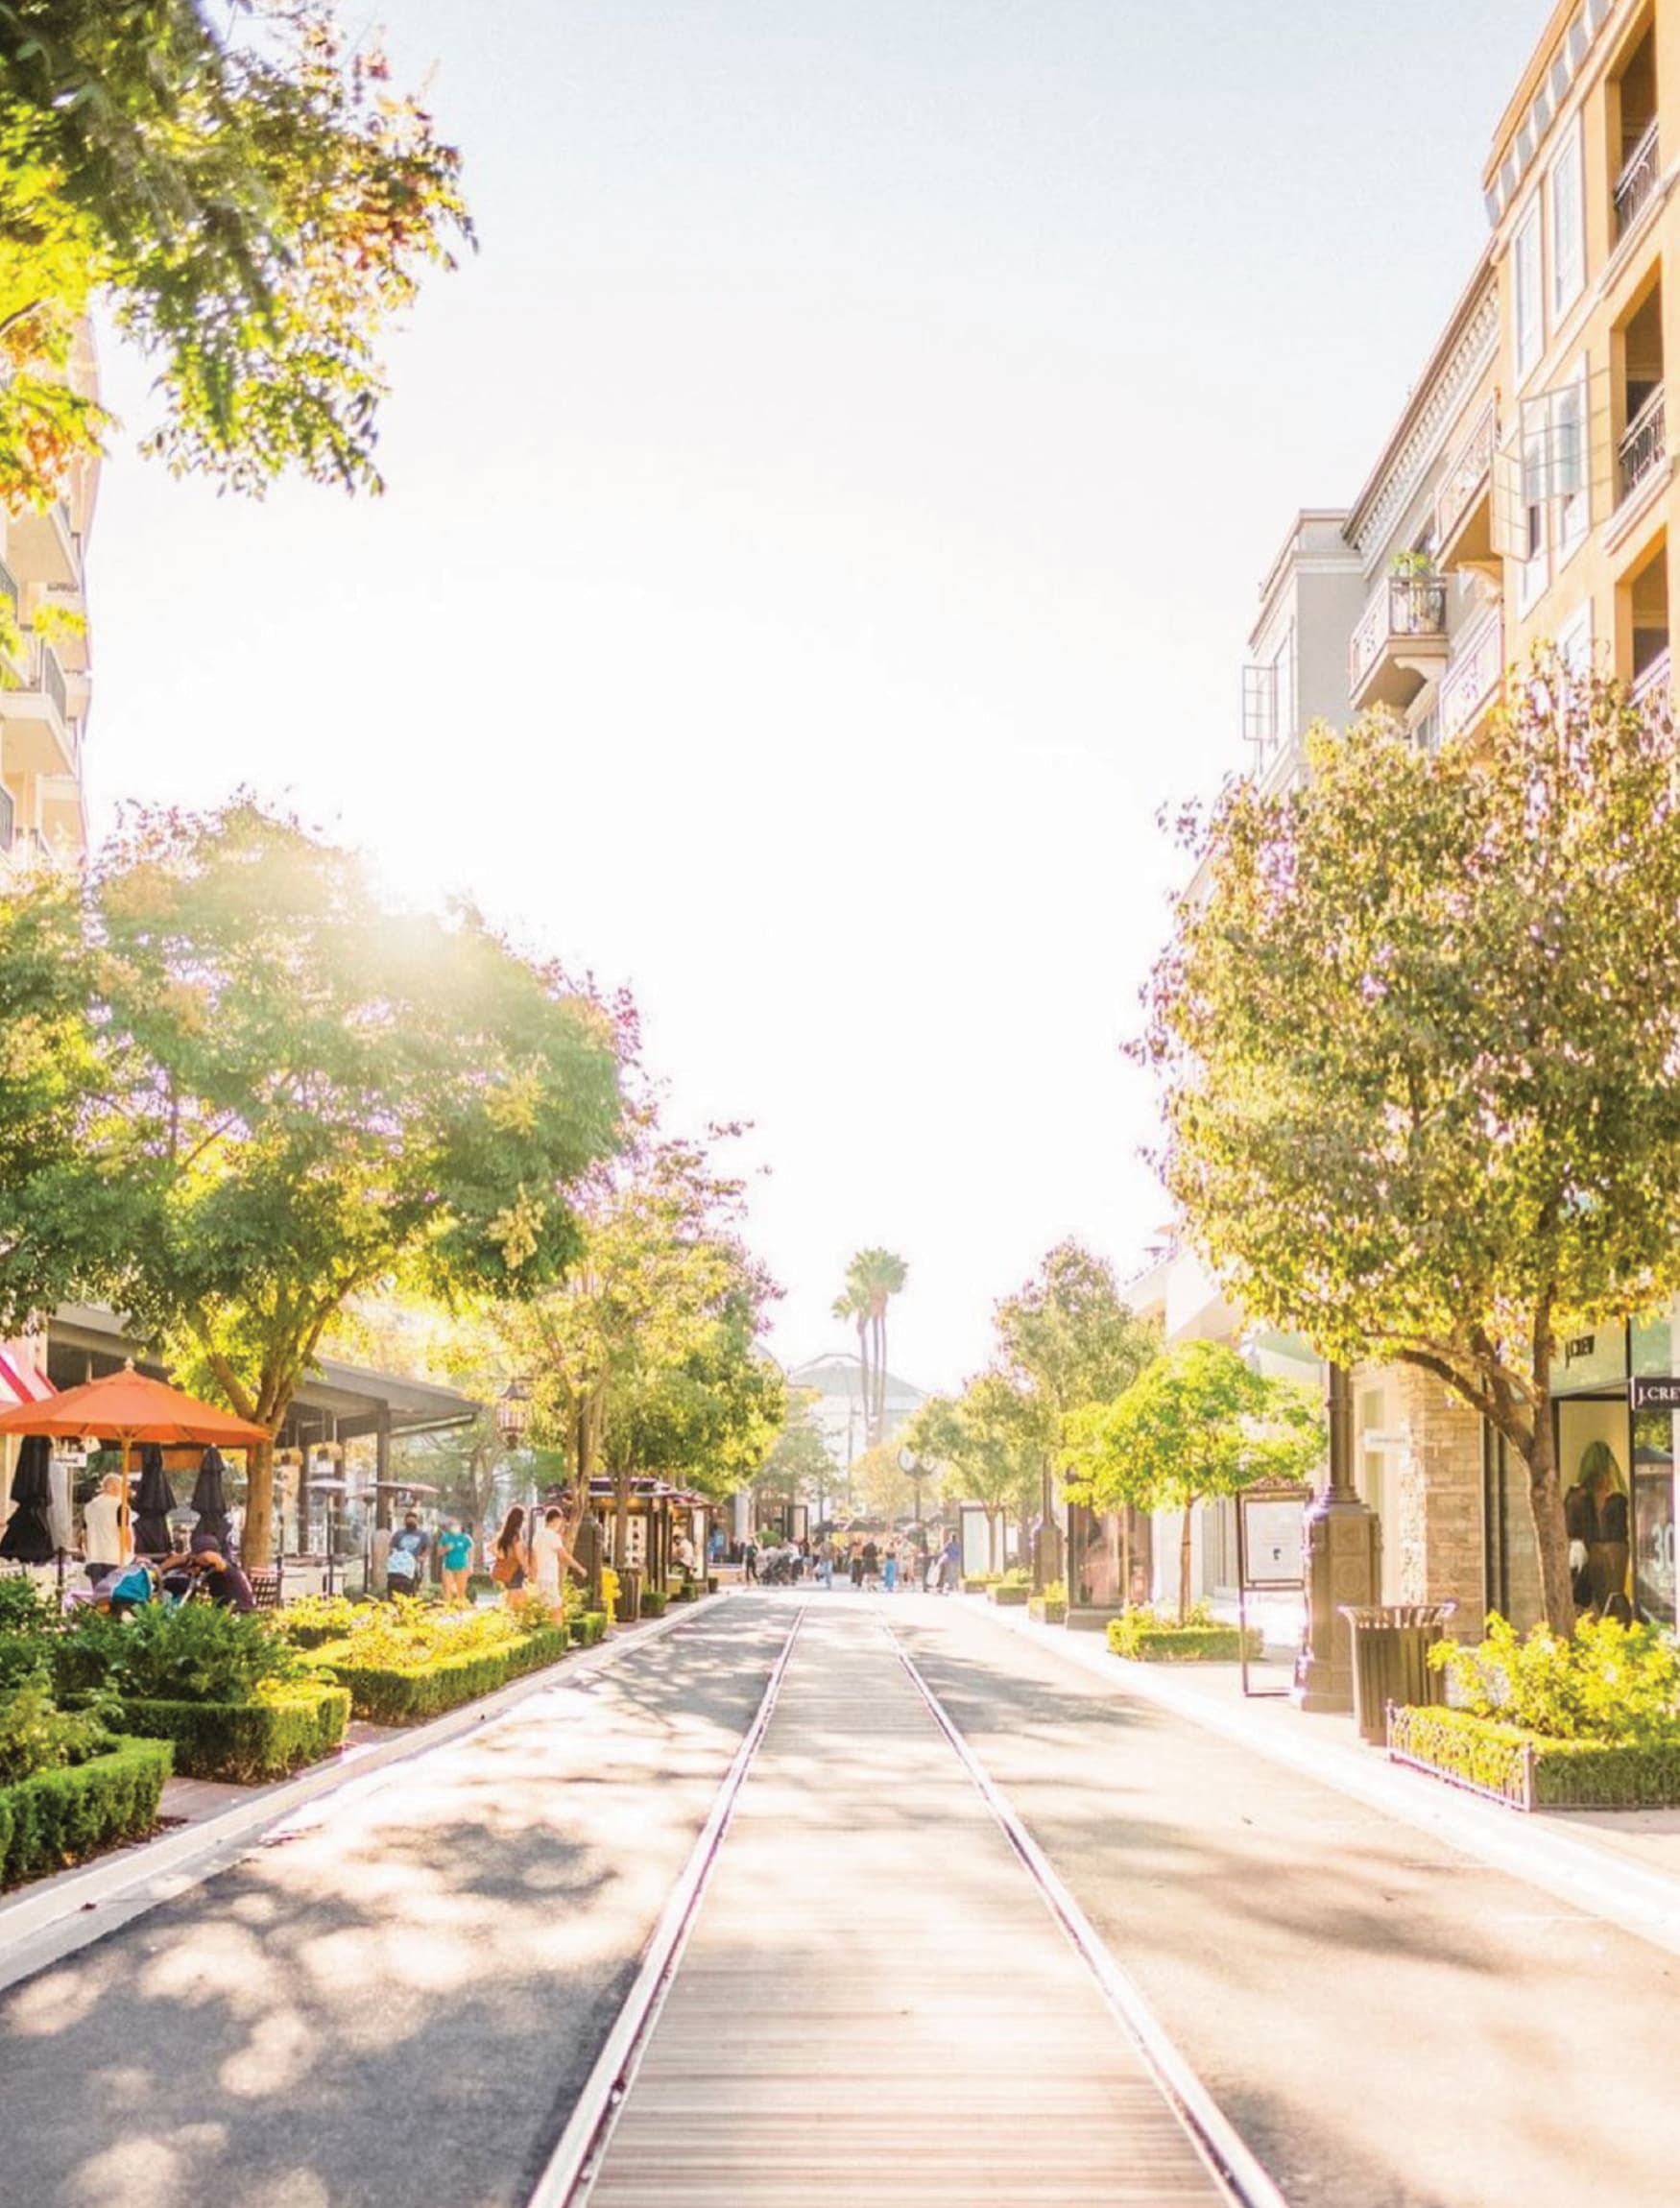 Image of the street in the sunlight at Americana at Brand